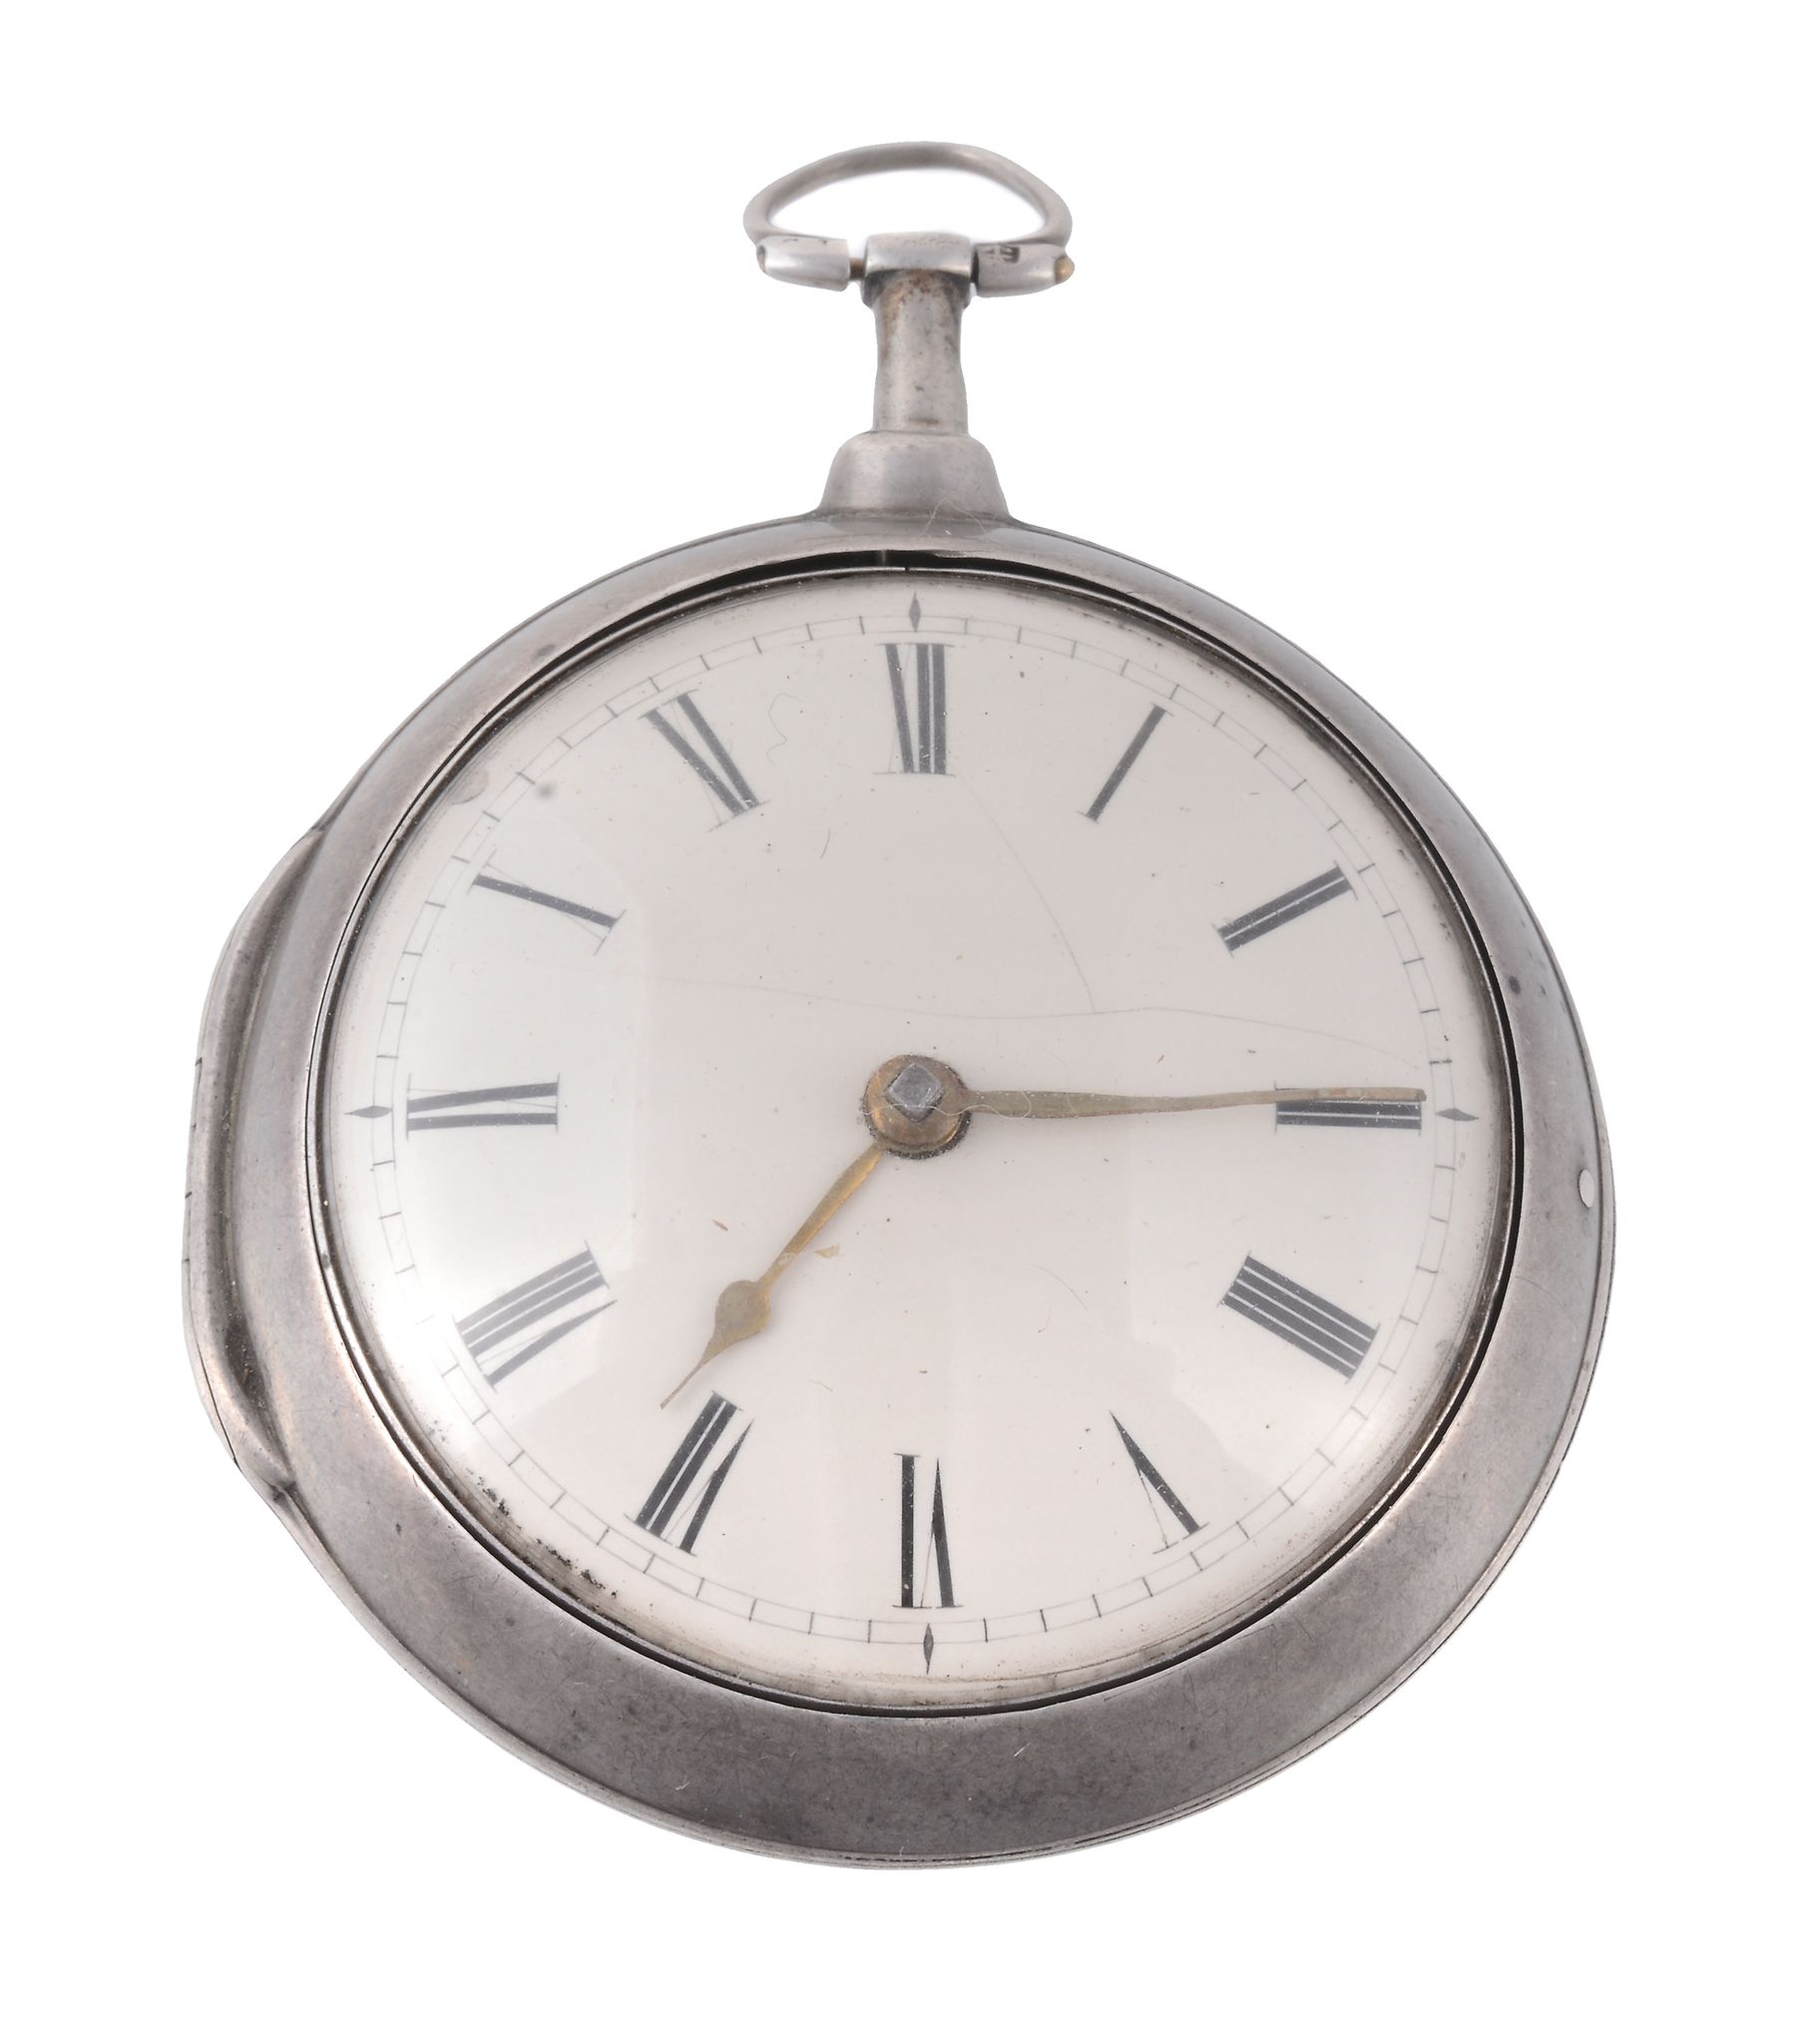 B. Clowes, Liverpool, a silver pair cased pocket watch  B. Clowes, Liverpool, a silver pair cased